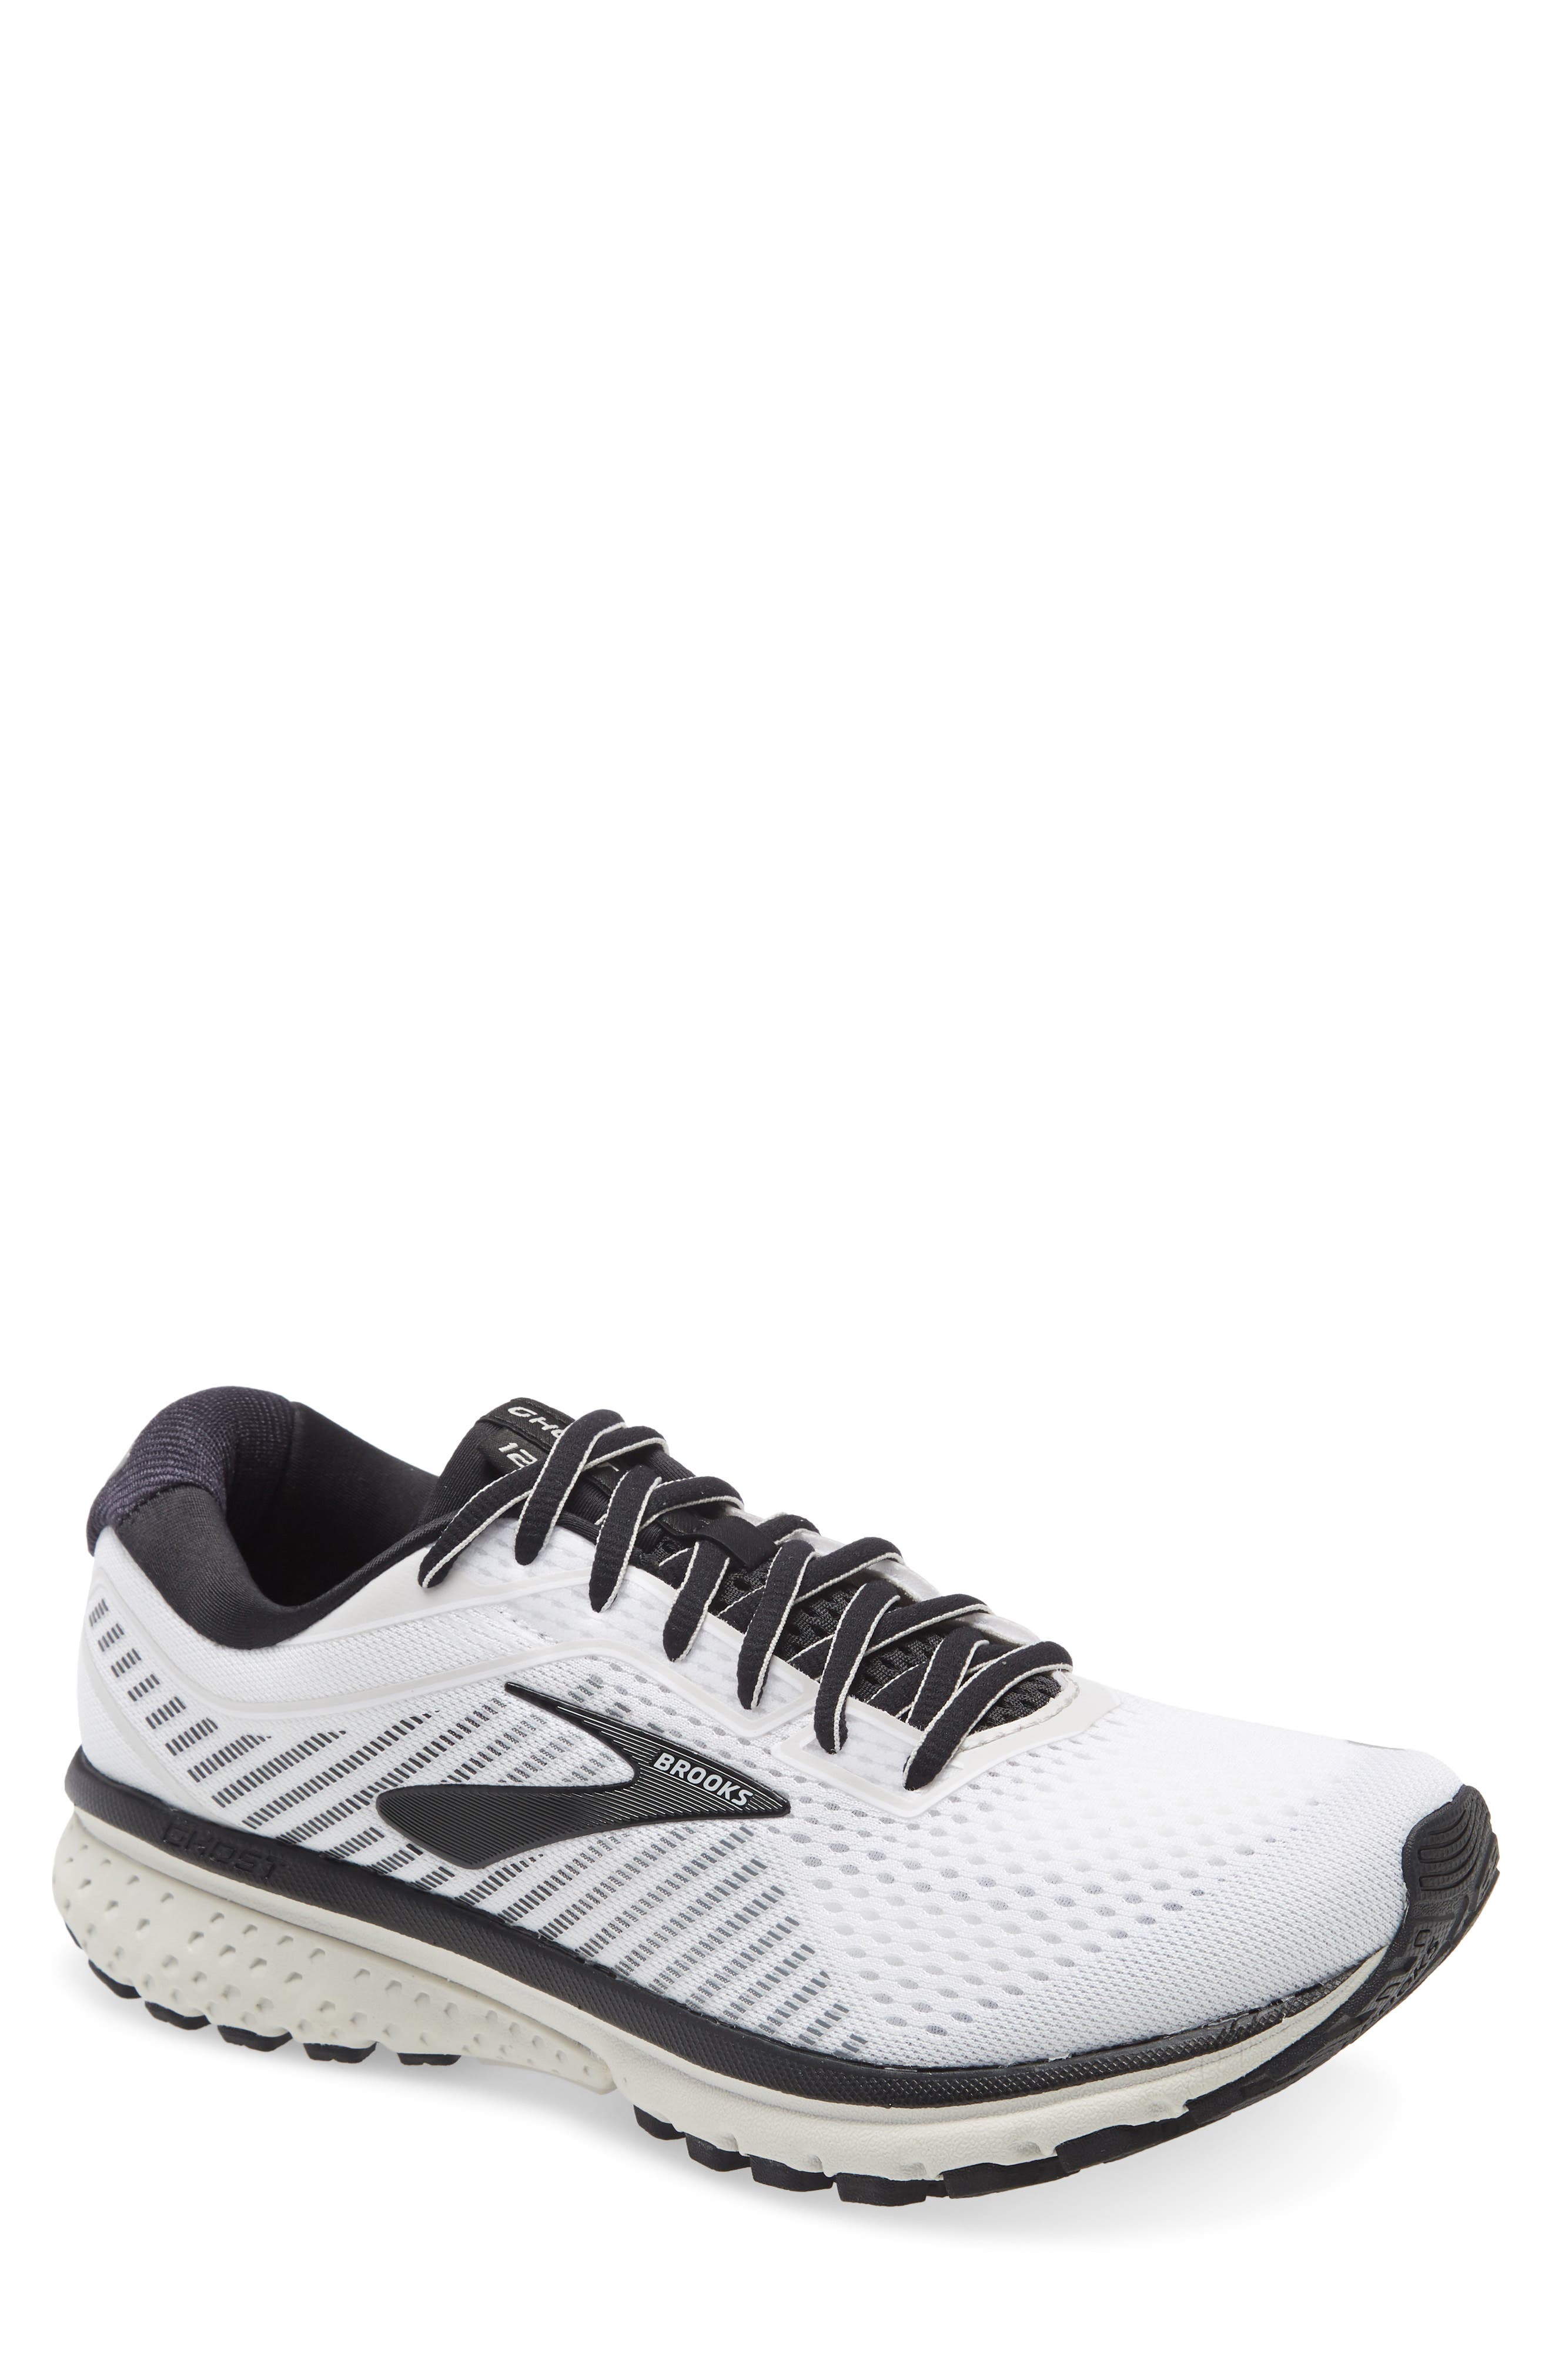 clearance mens brooks running shoes